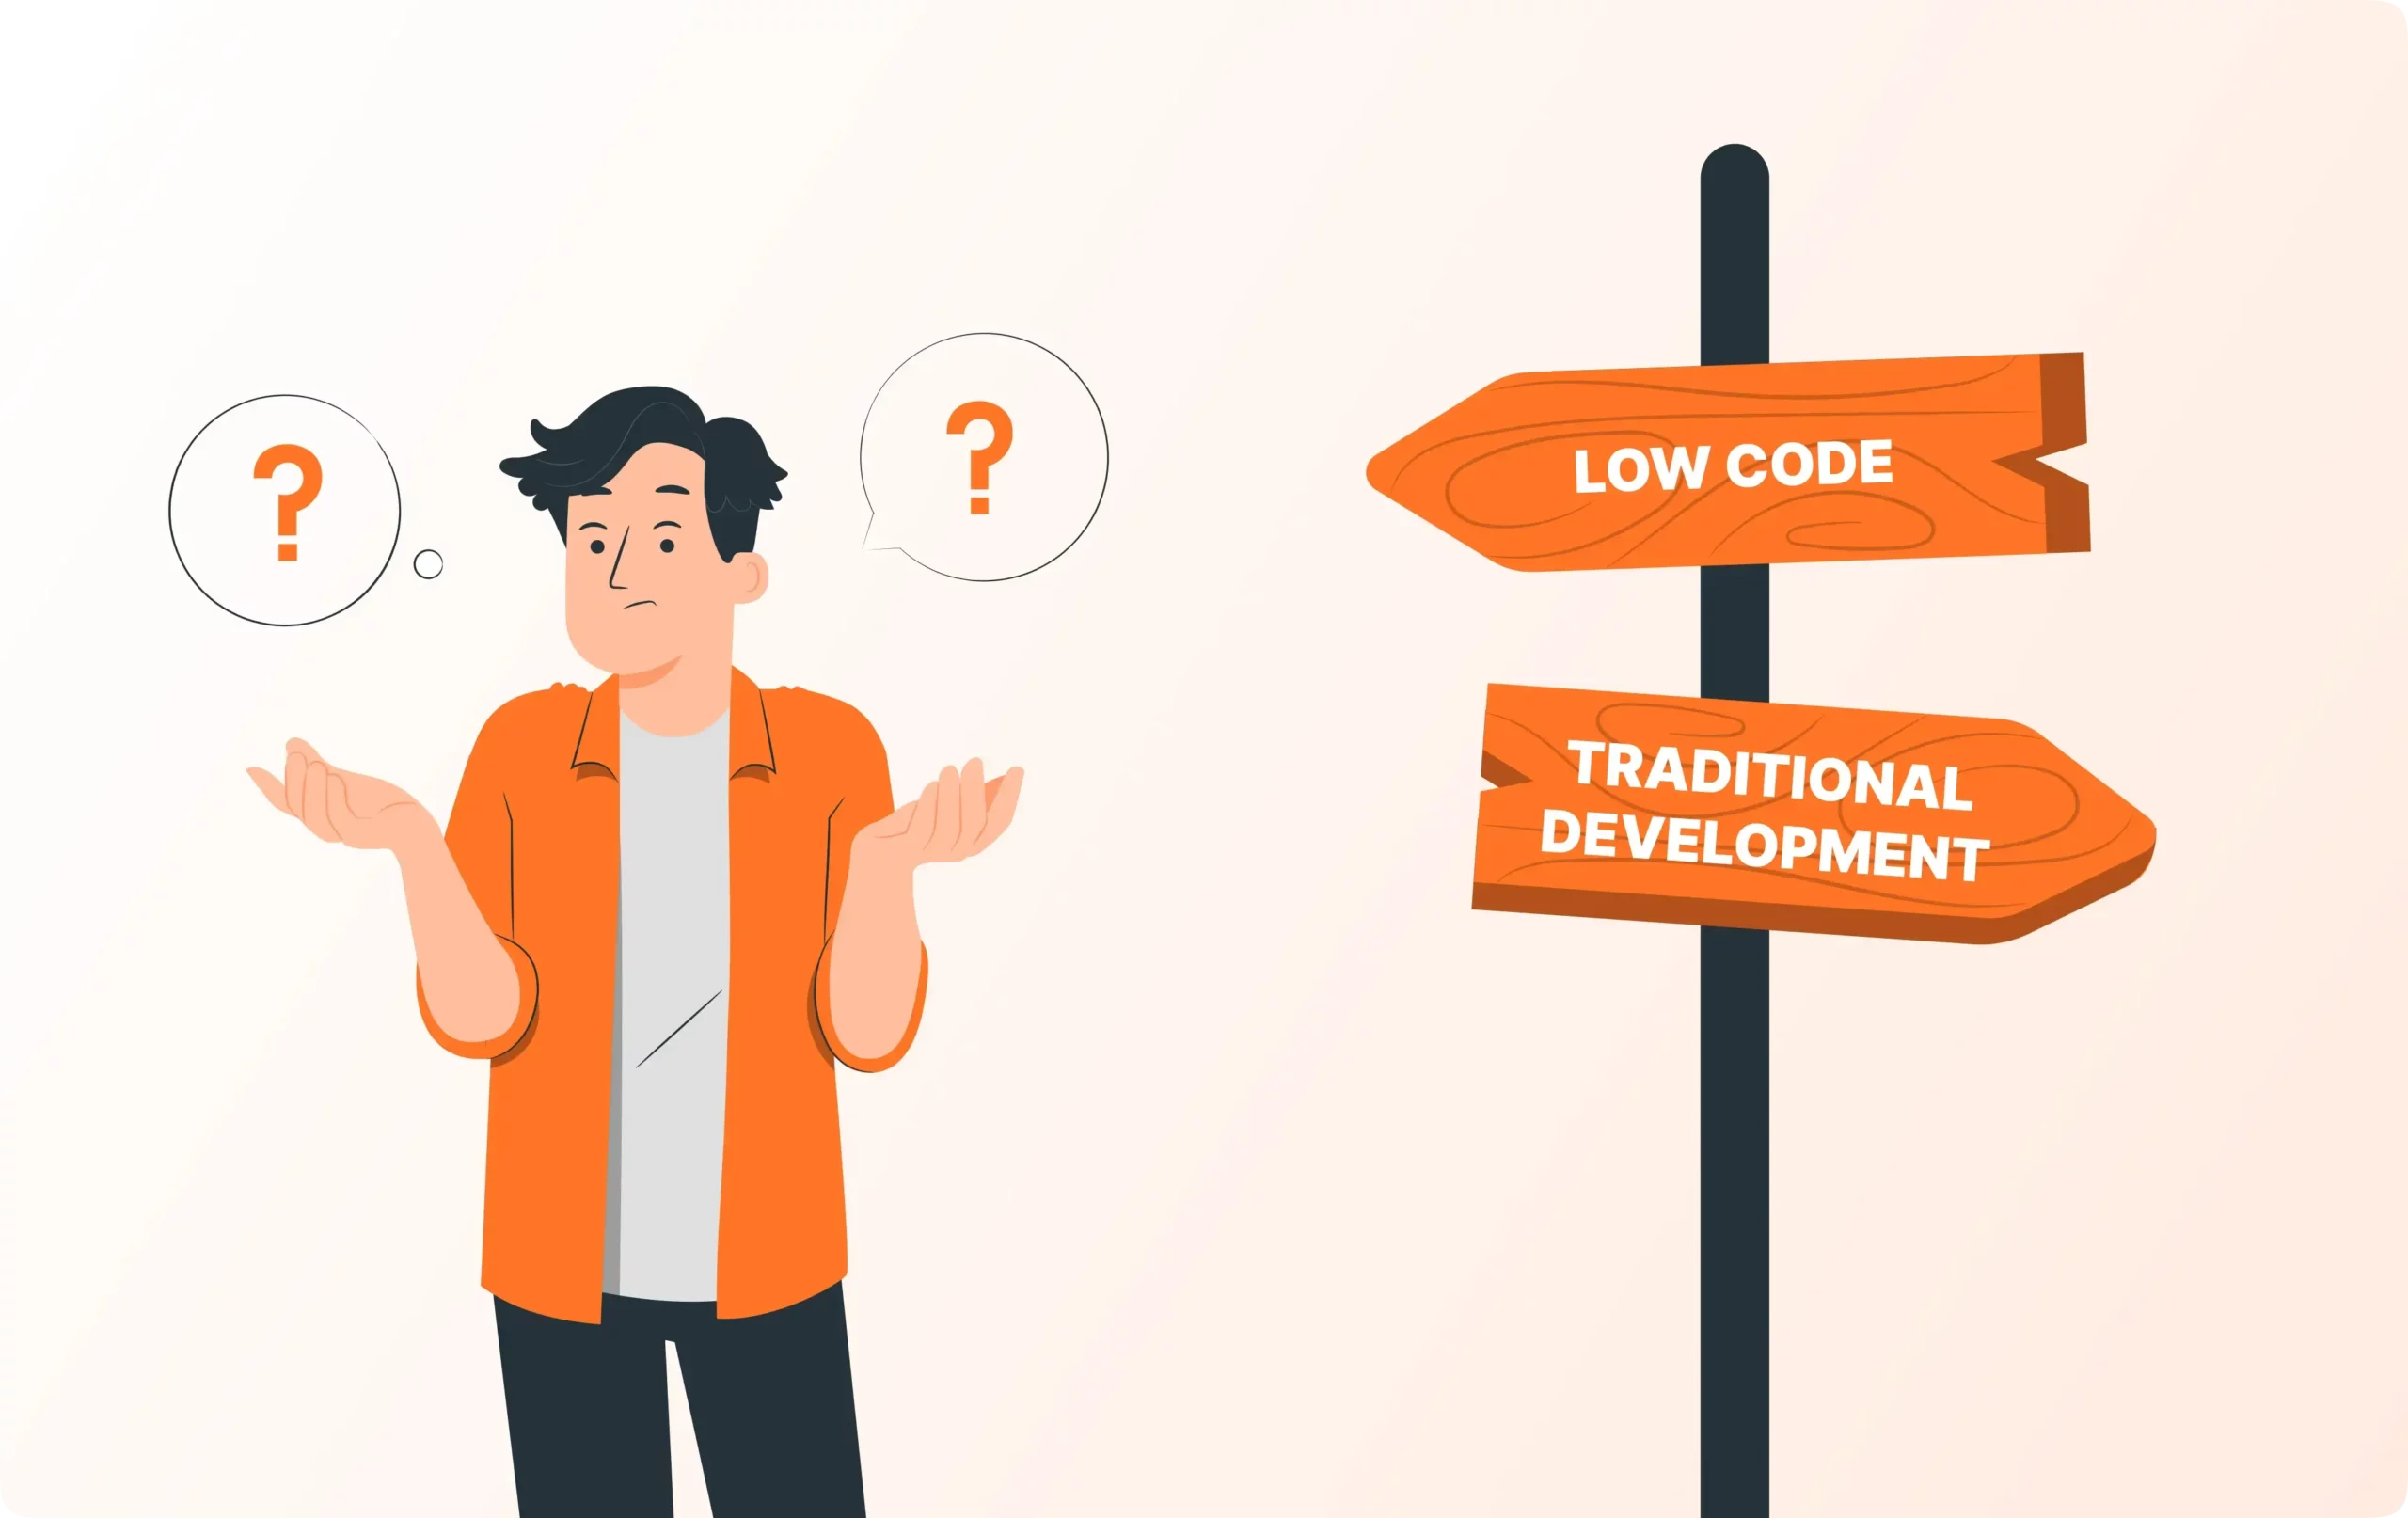 When to pitch low code